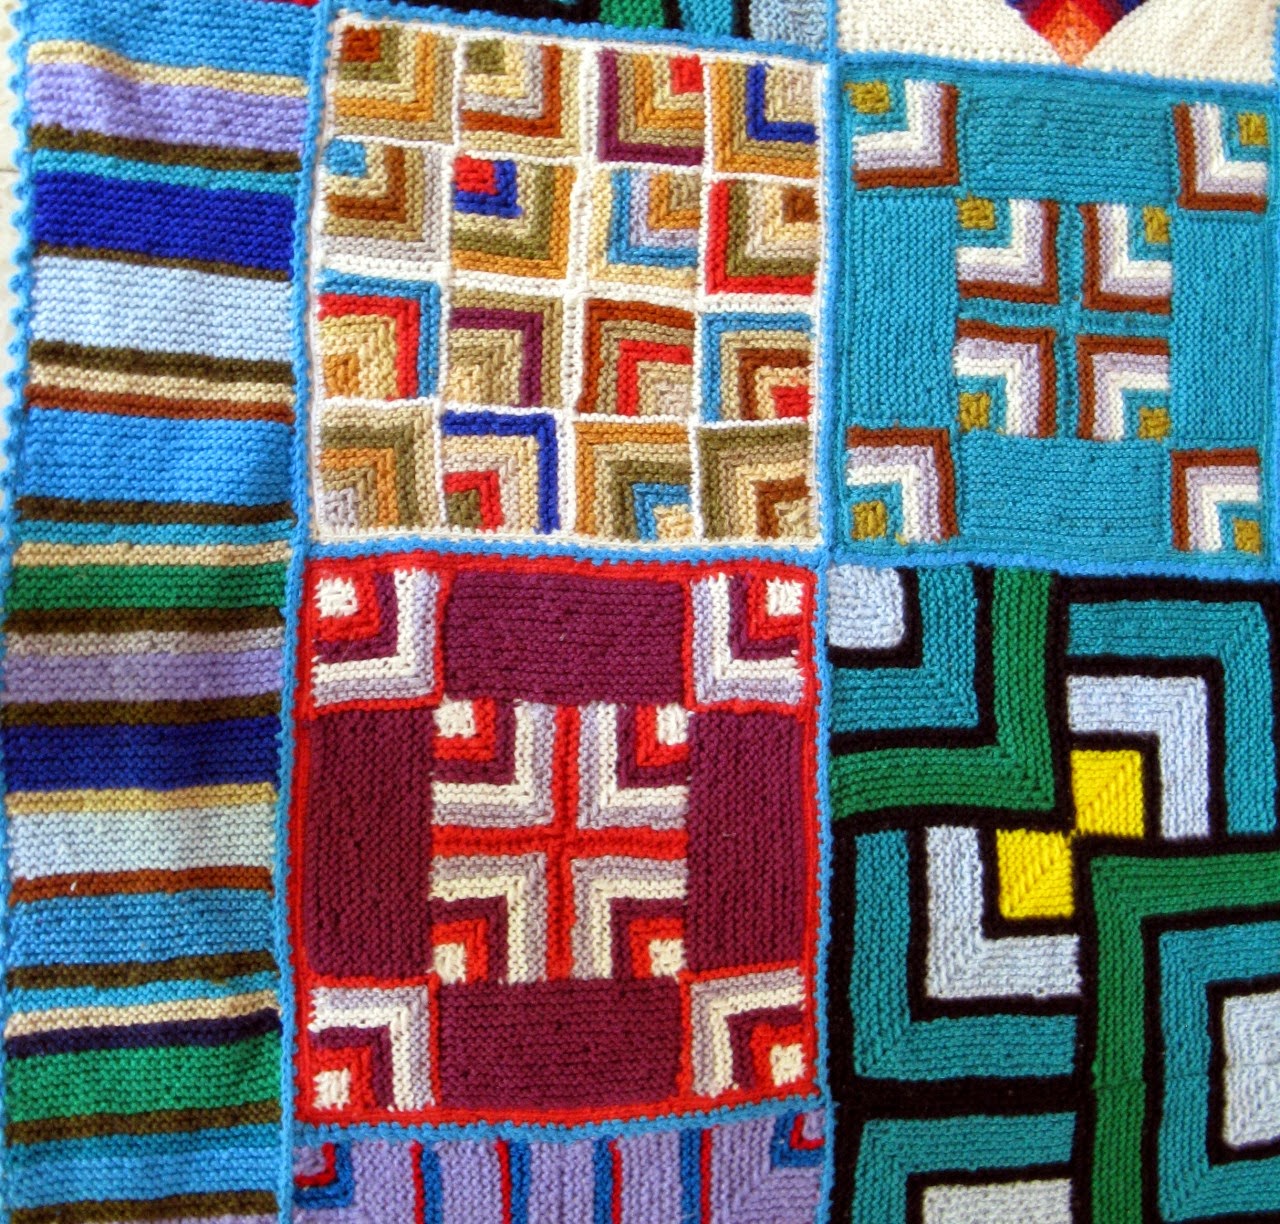 Irina: Knitted PATCHWORK. Ideas, LESSONS, blankets.